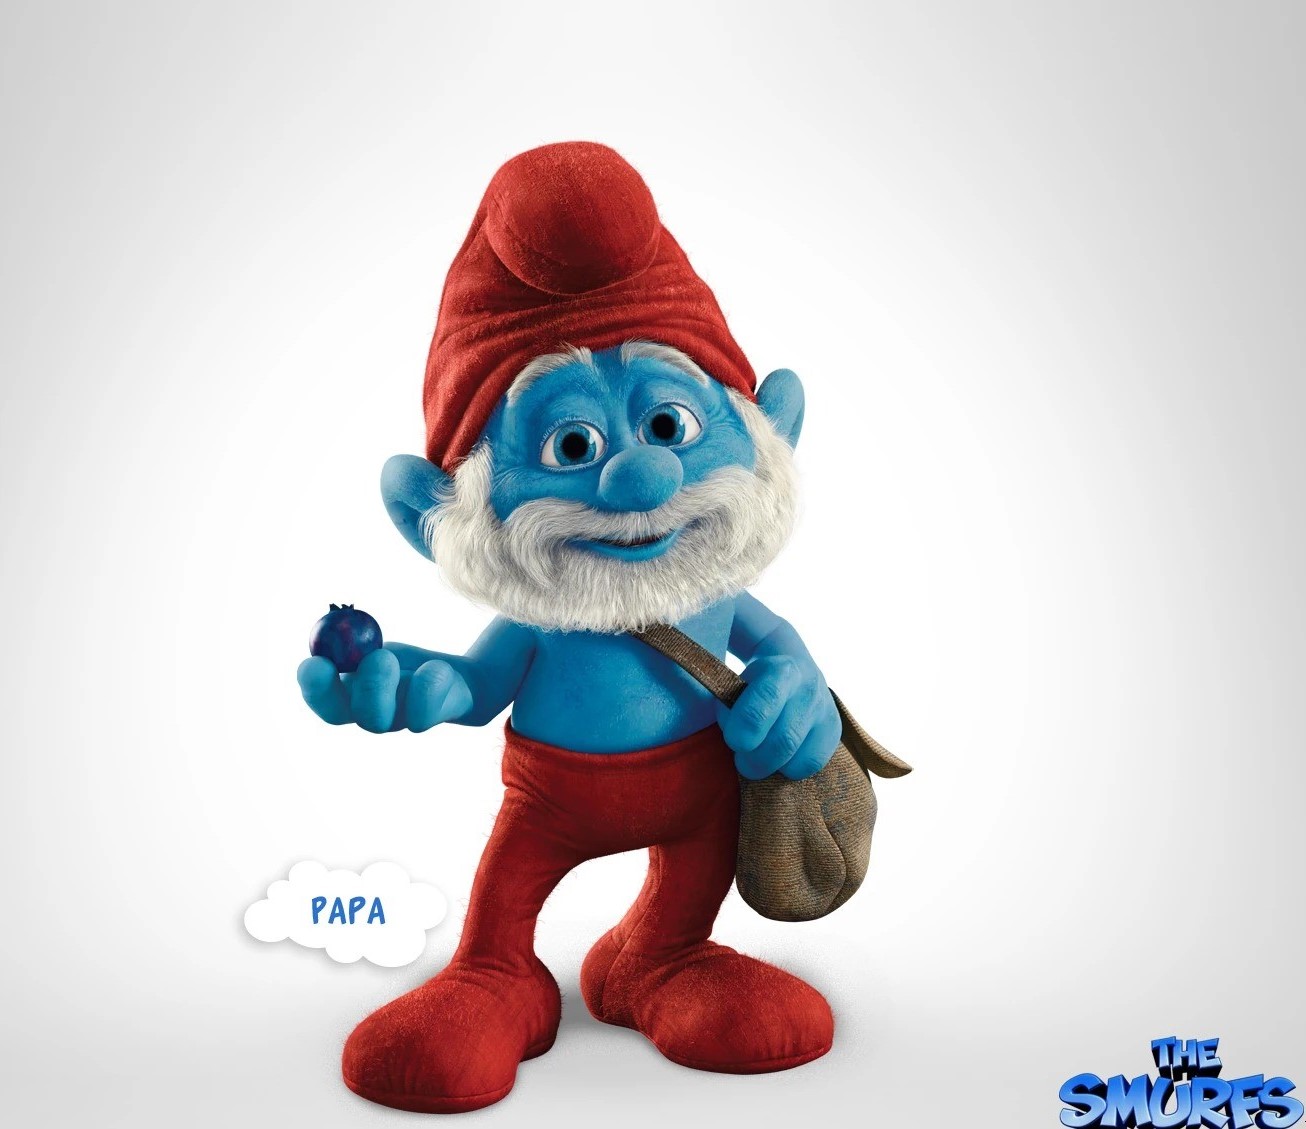 chan eng keat add photo a picture of a smurf